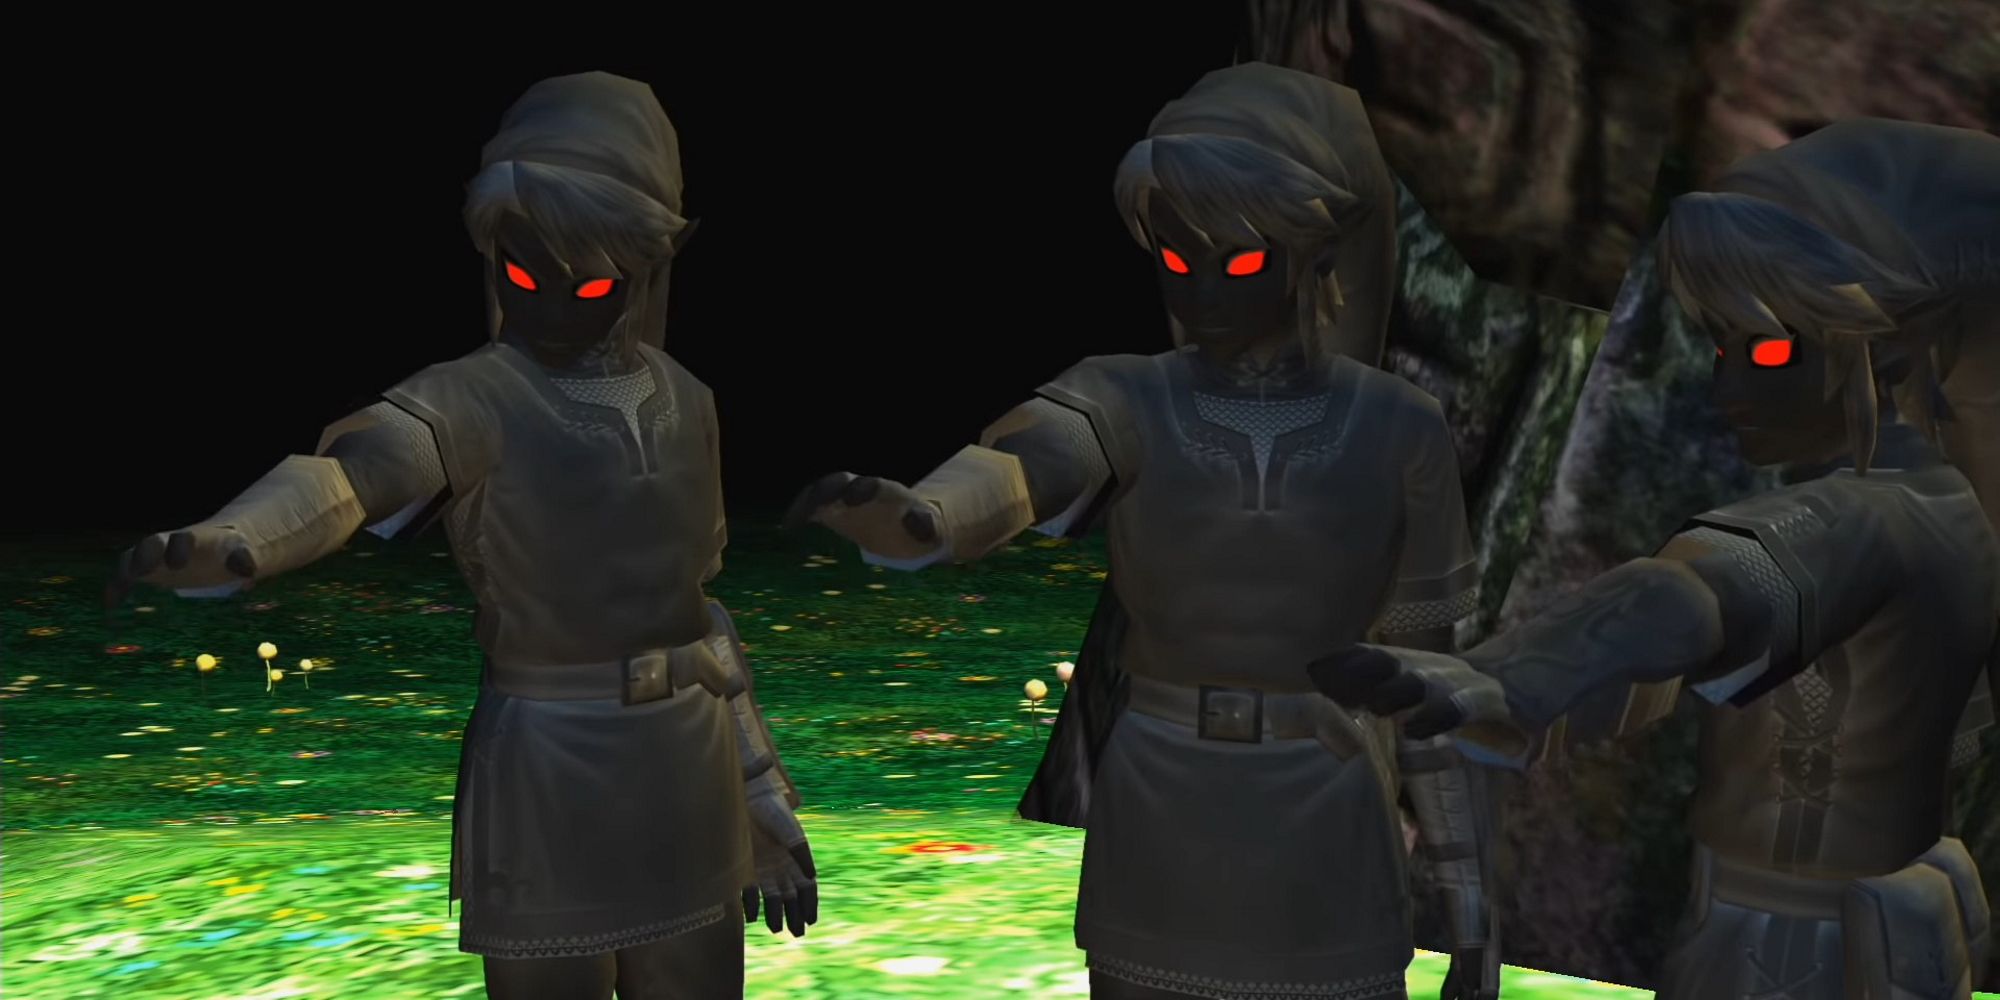 three dark link from the video game The Legend of Zelda: Twilight Princess